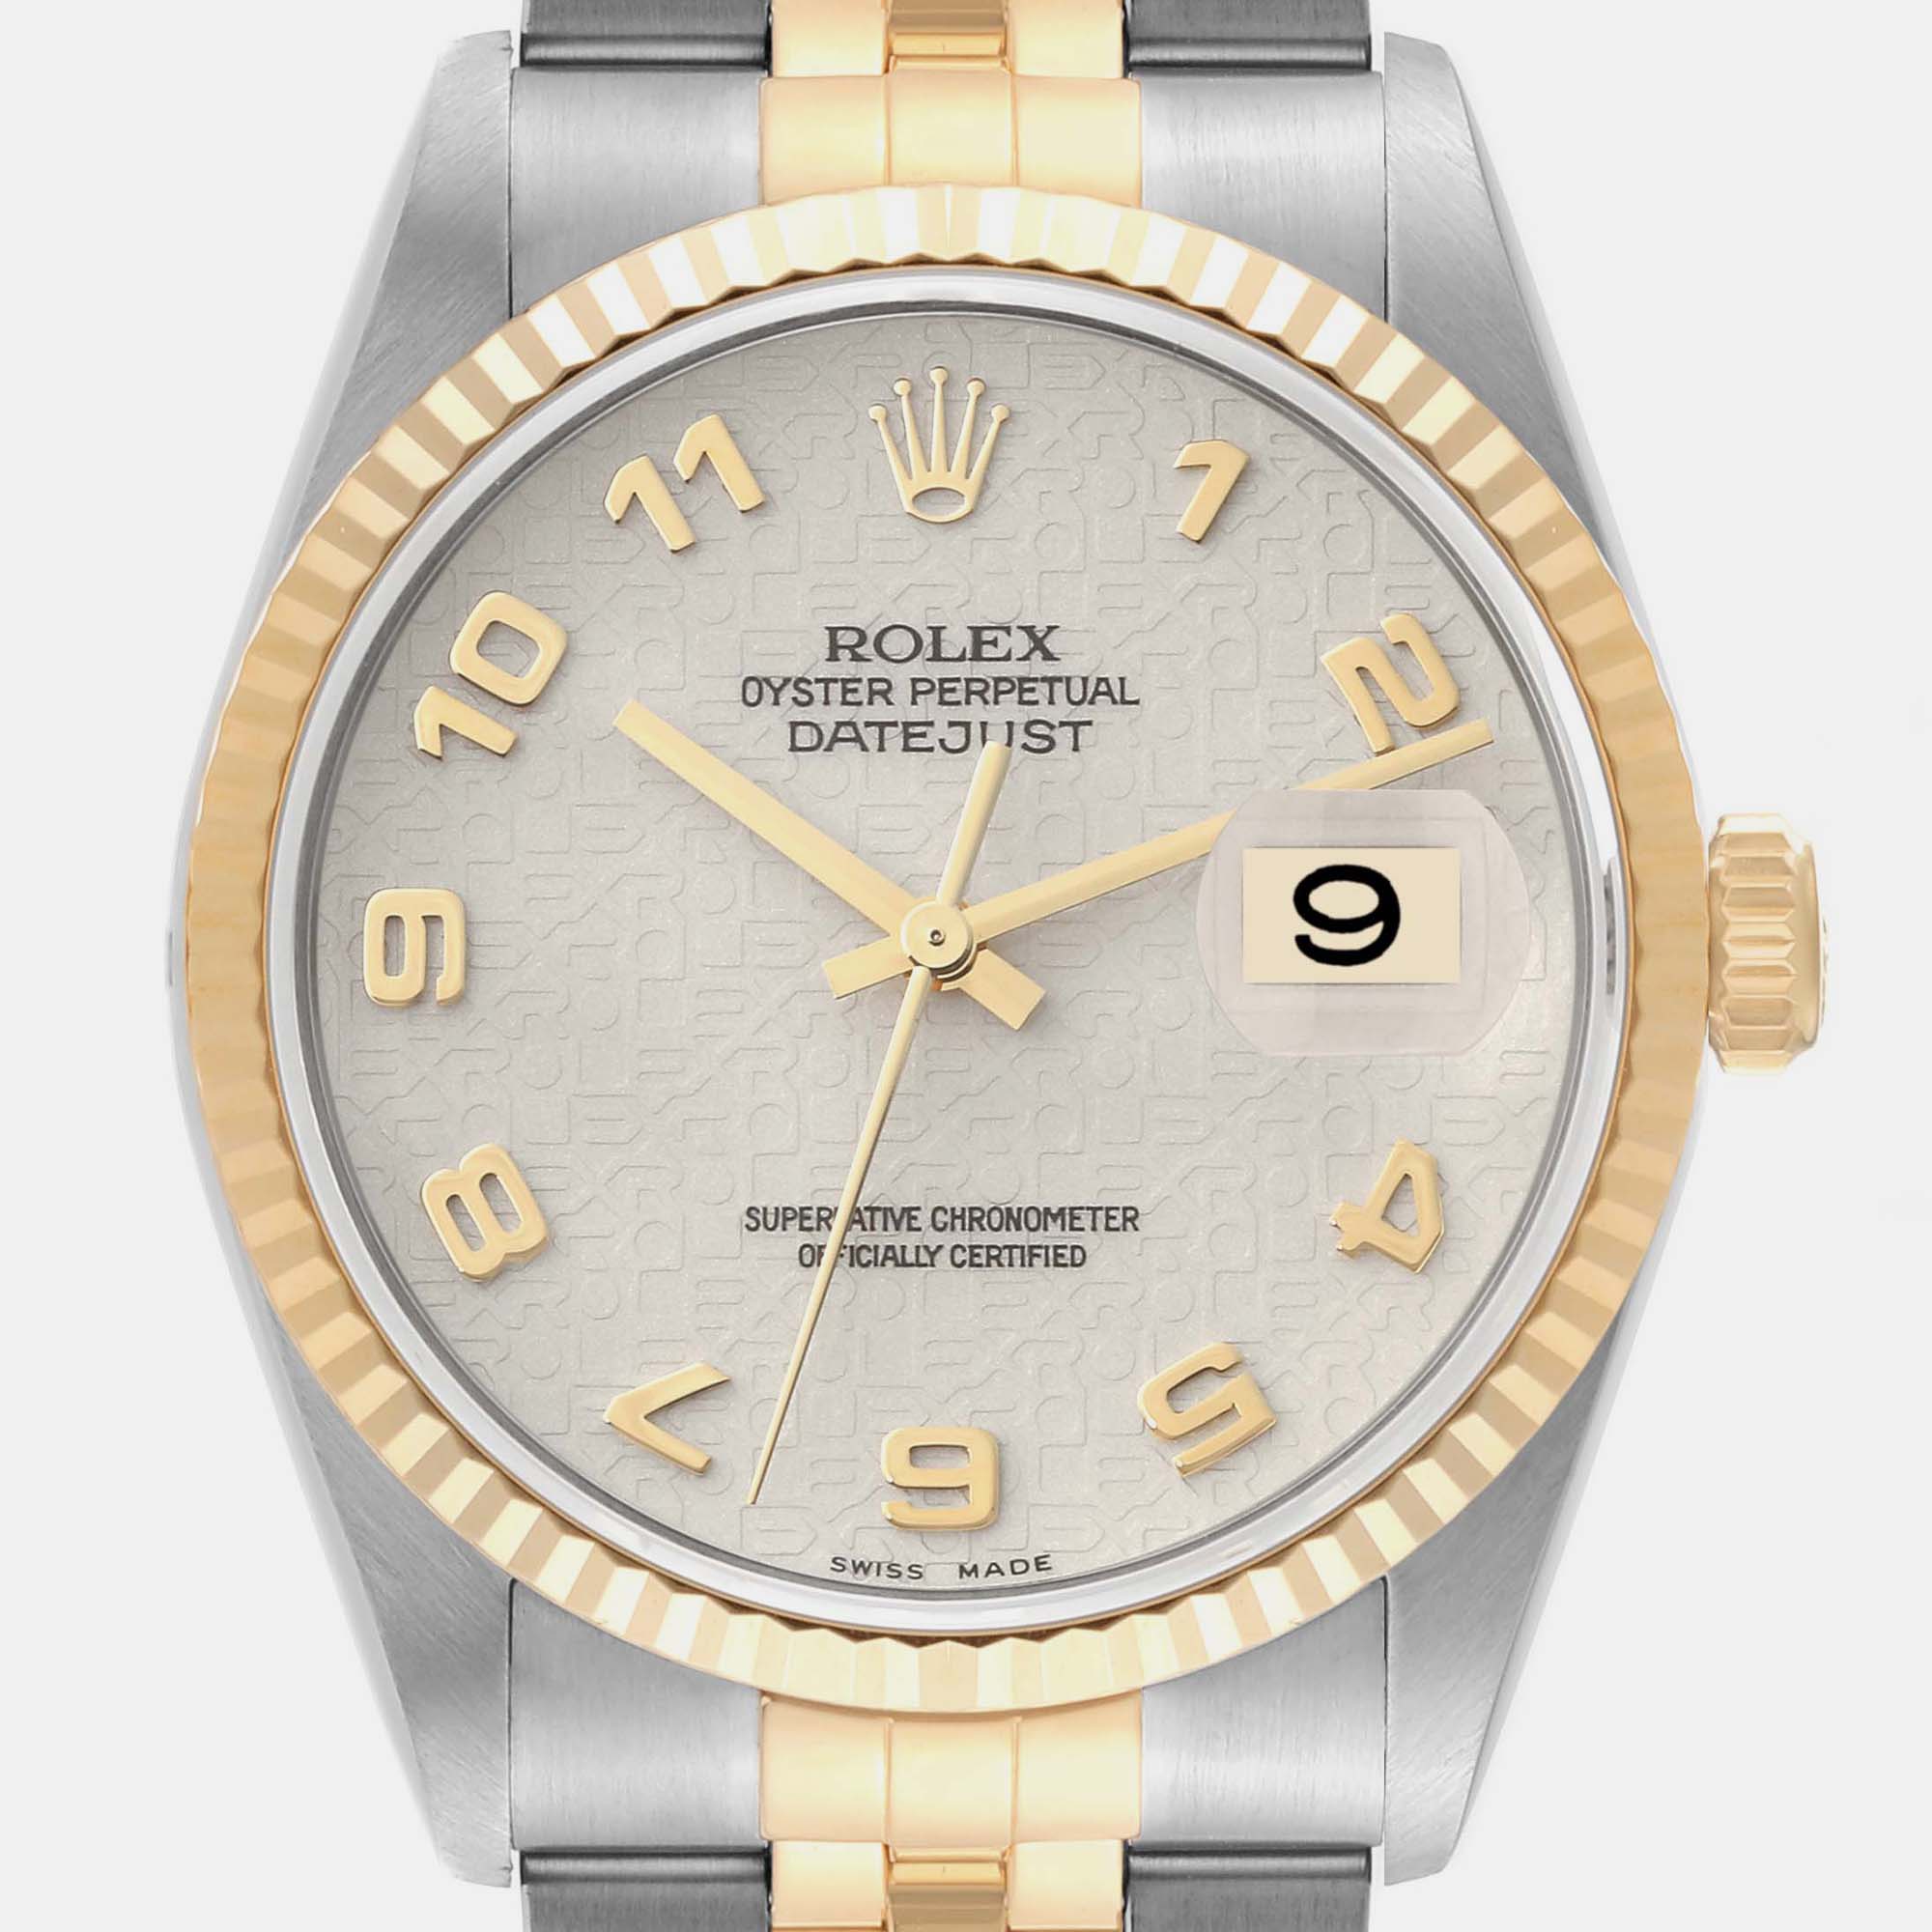 Rolex Datejust Steel Yellow Gold Ivory Anniversary Dial Mens Watch 16233